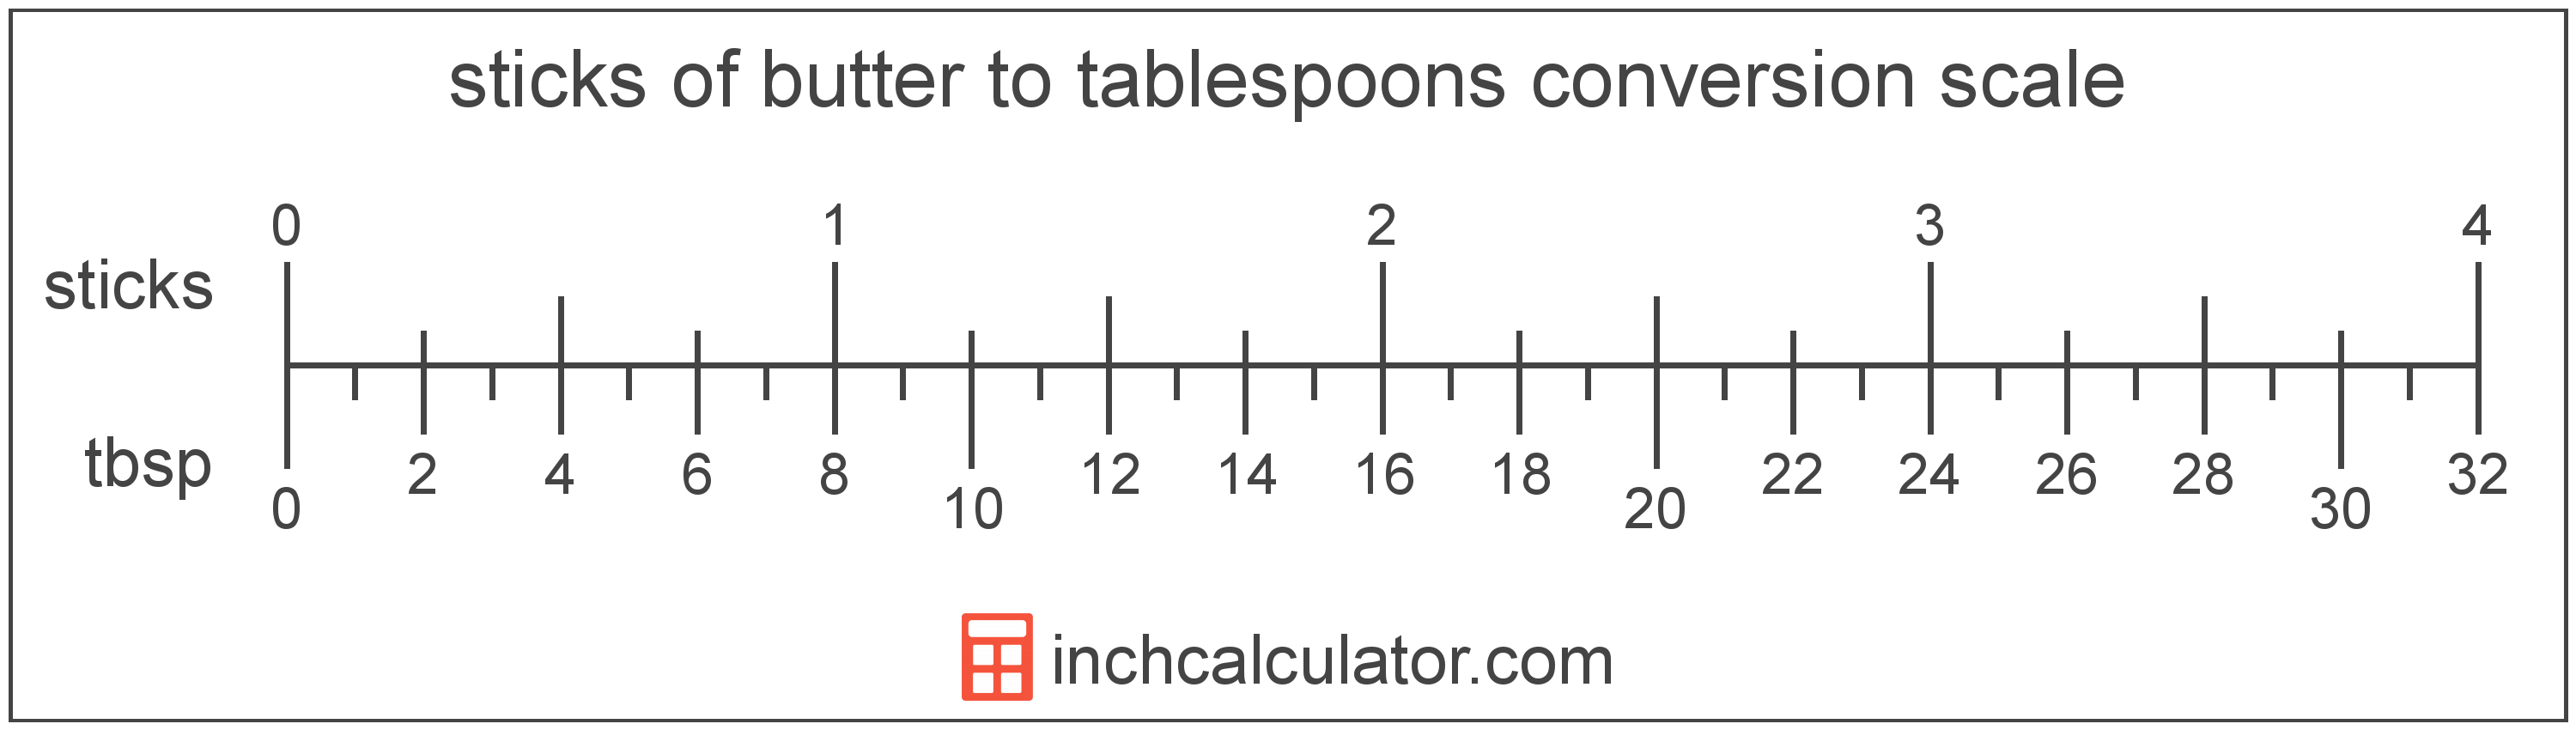 Tablespoons To Sticks Of Butter Conversion Inch Calculator